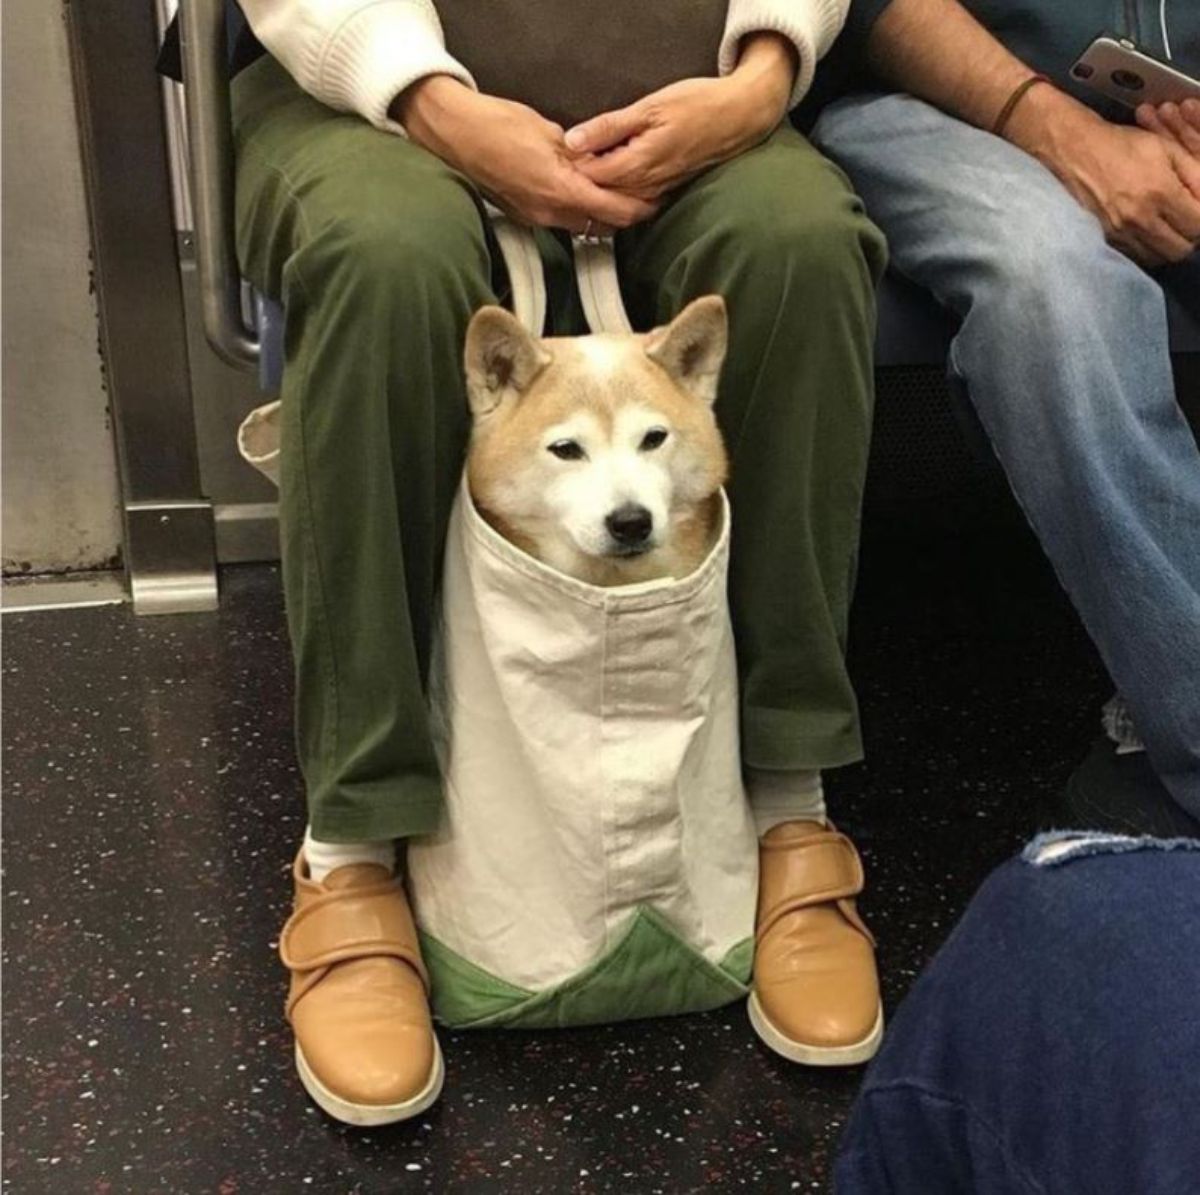 brown and white dog in a white and green cloth bag with the head sticking out on the floor between someone's legs